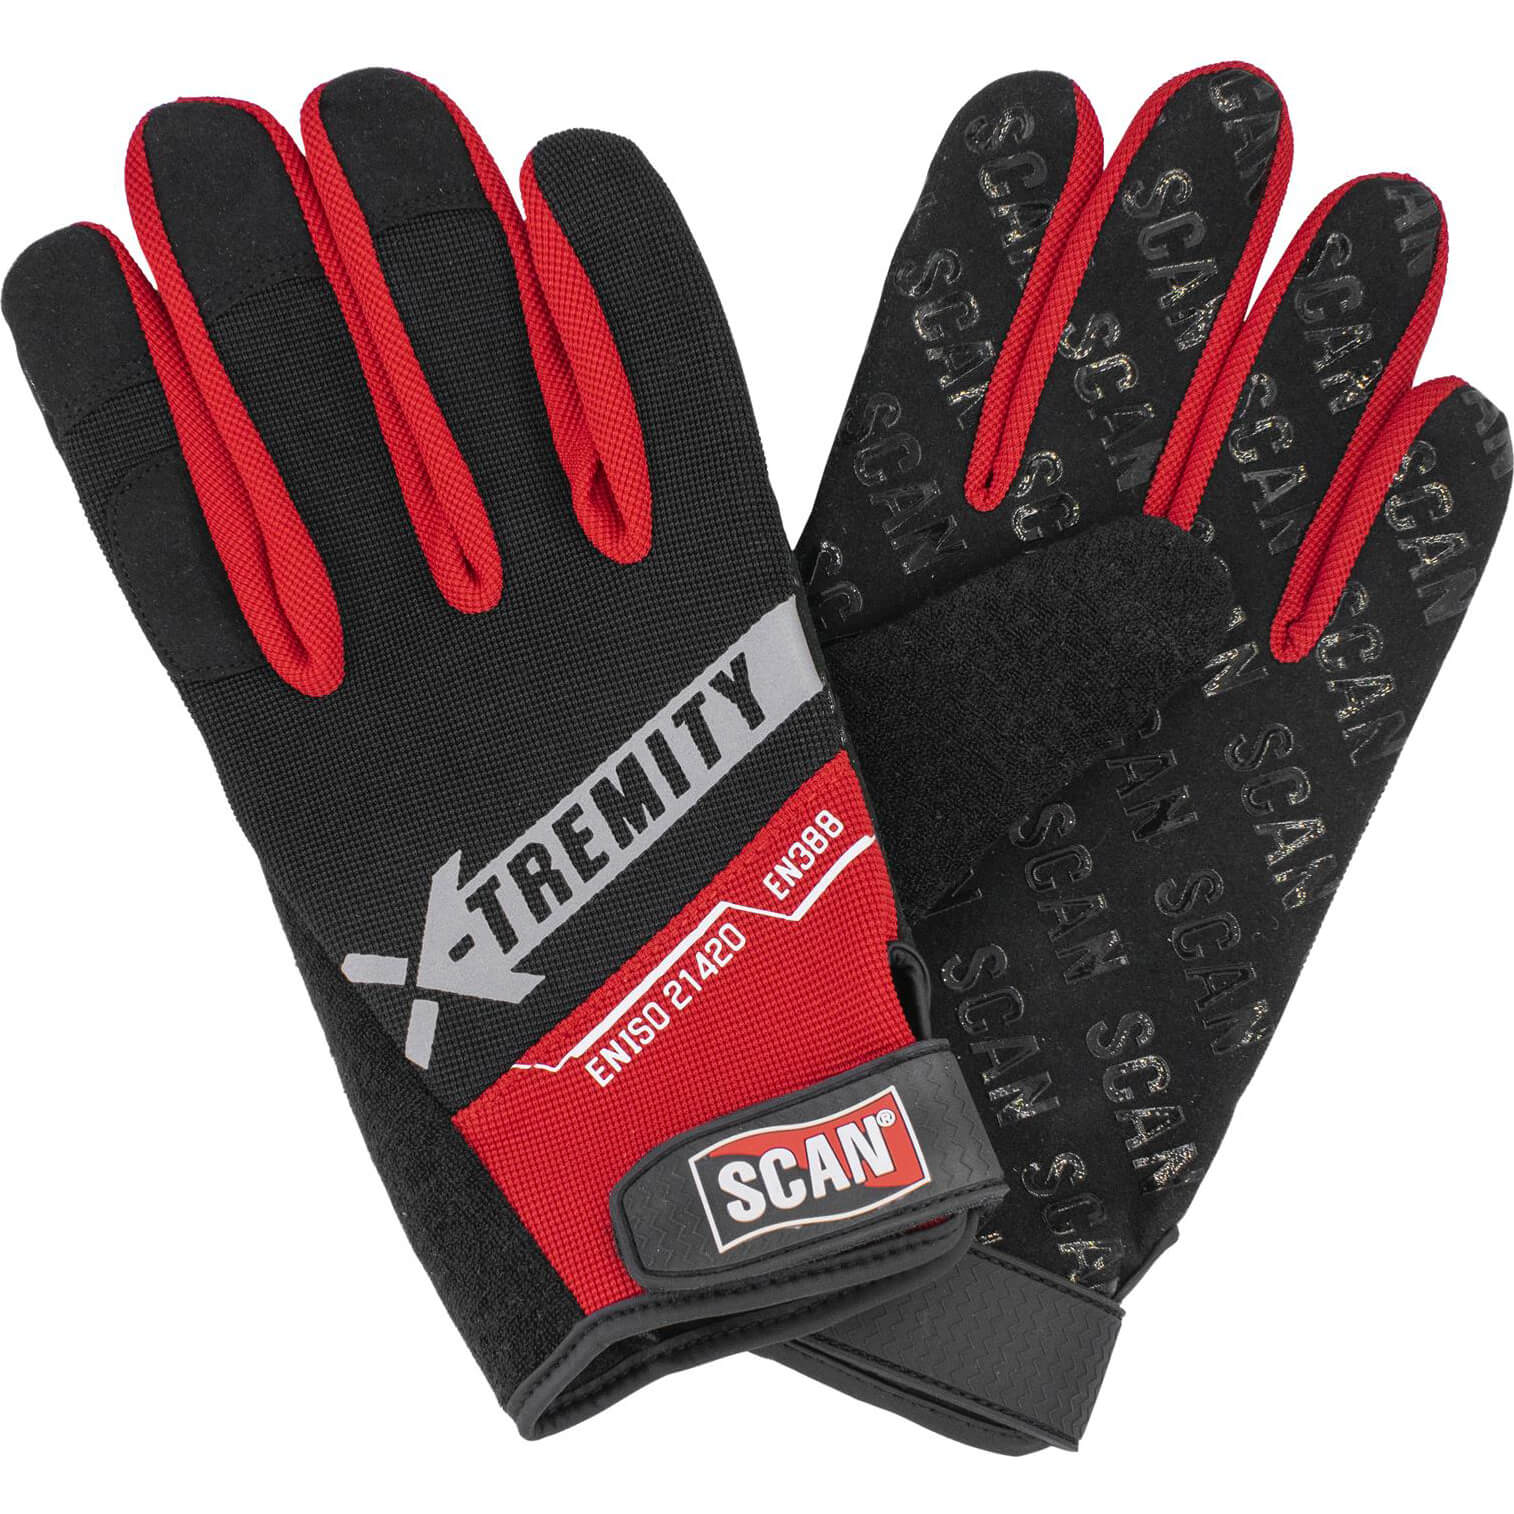 Image of Scan Touch Screen Work Gloves XL